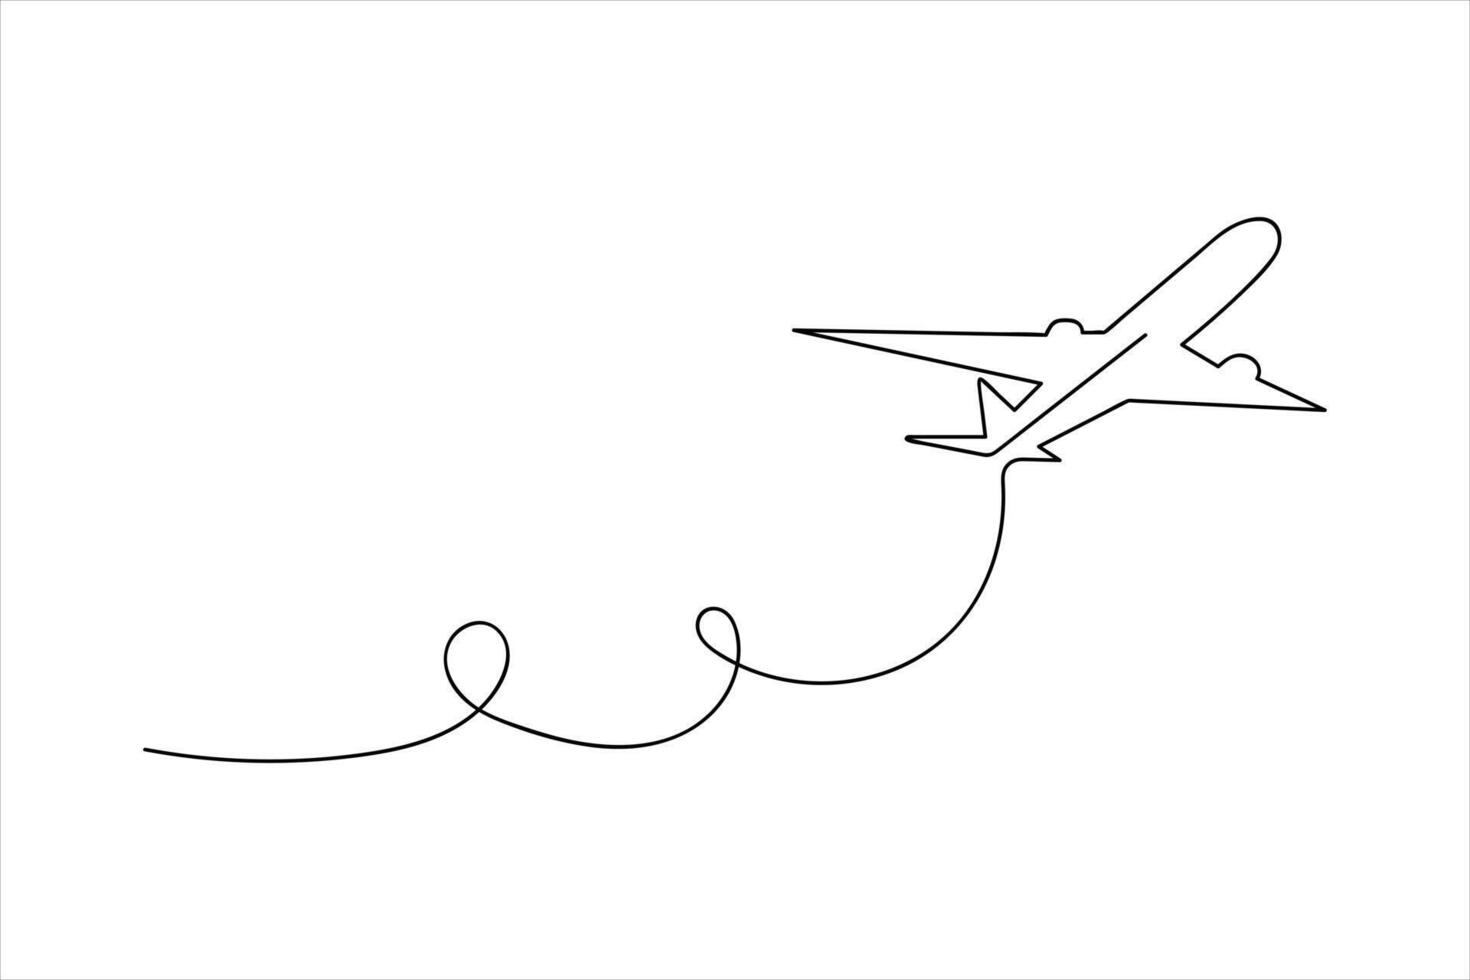 Airplane Continuous Single Line art Vectors and Illustrations design.